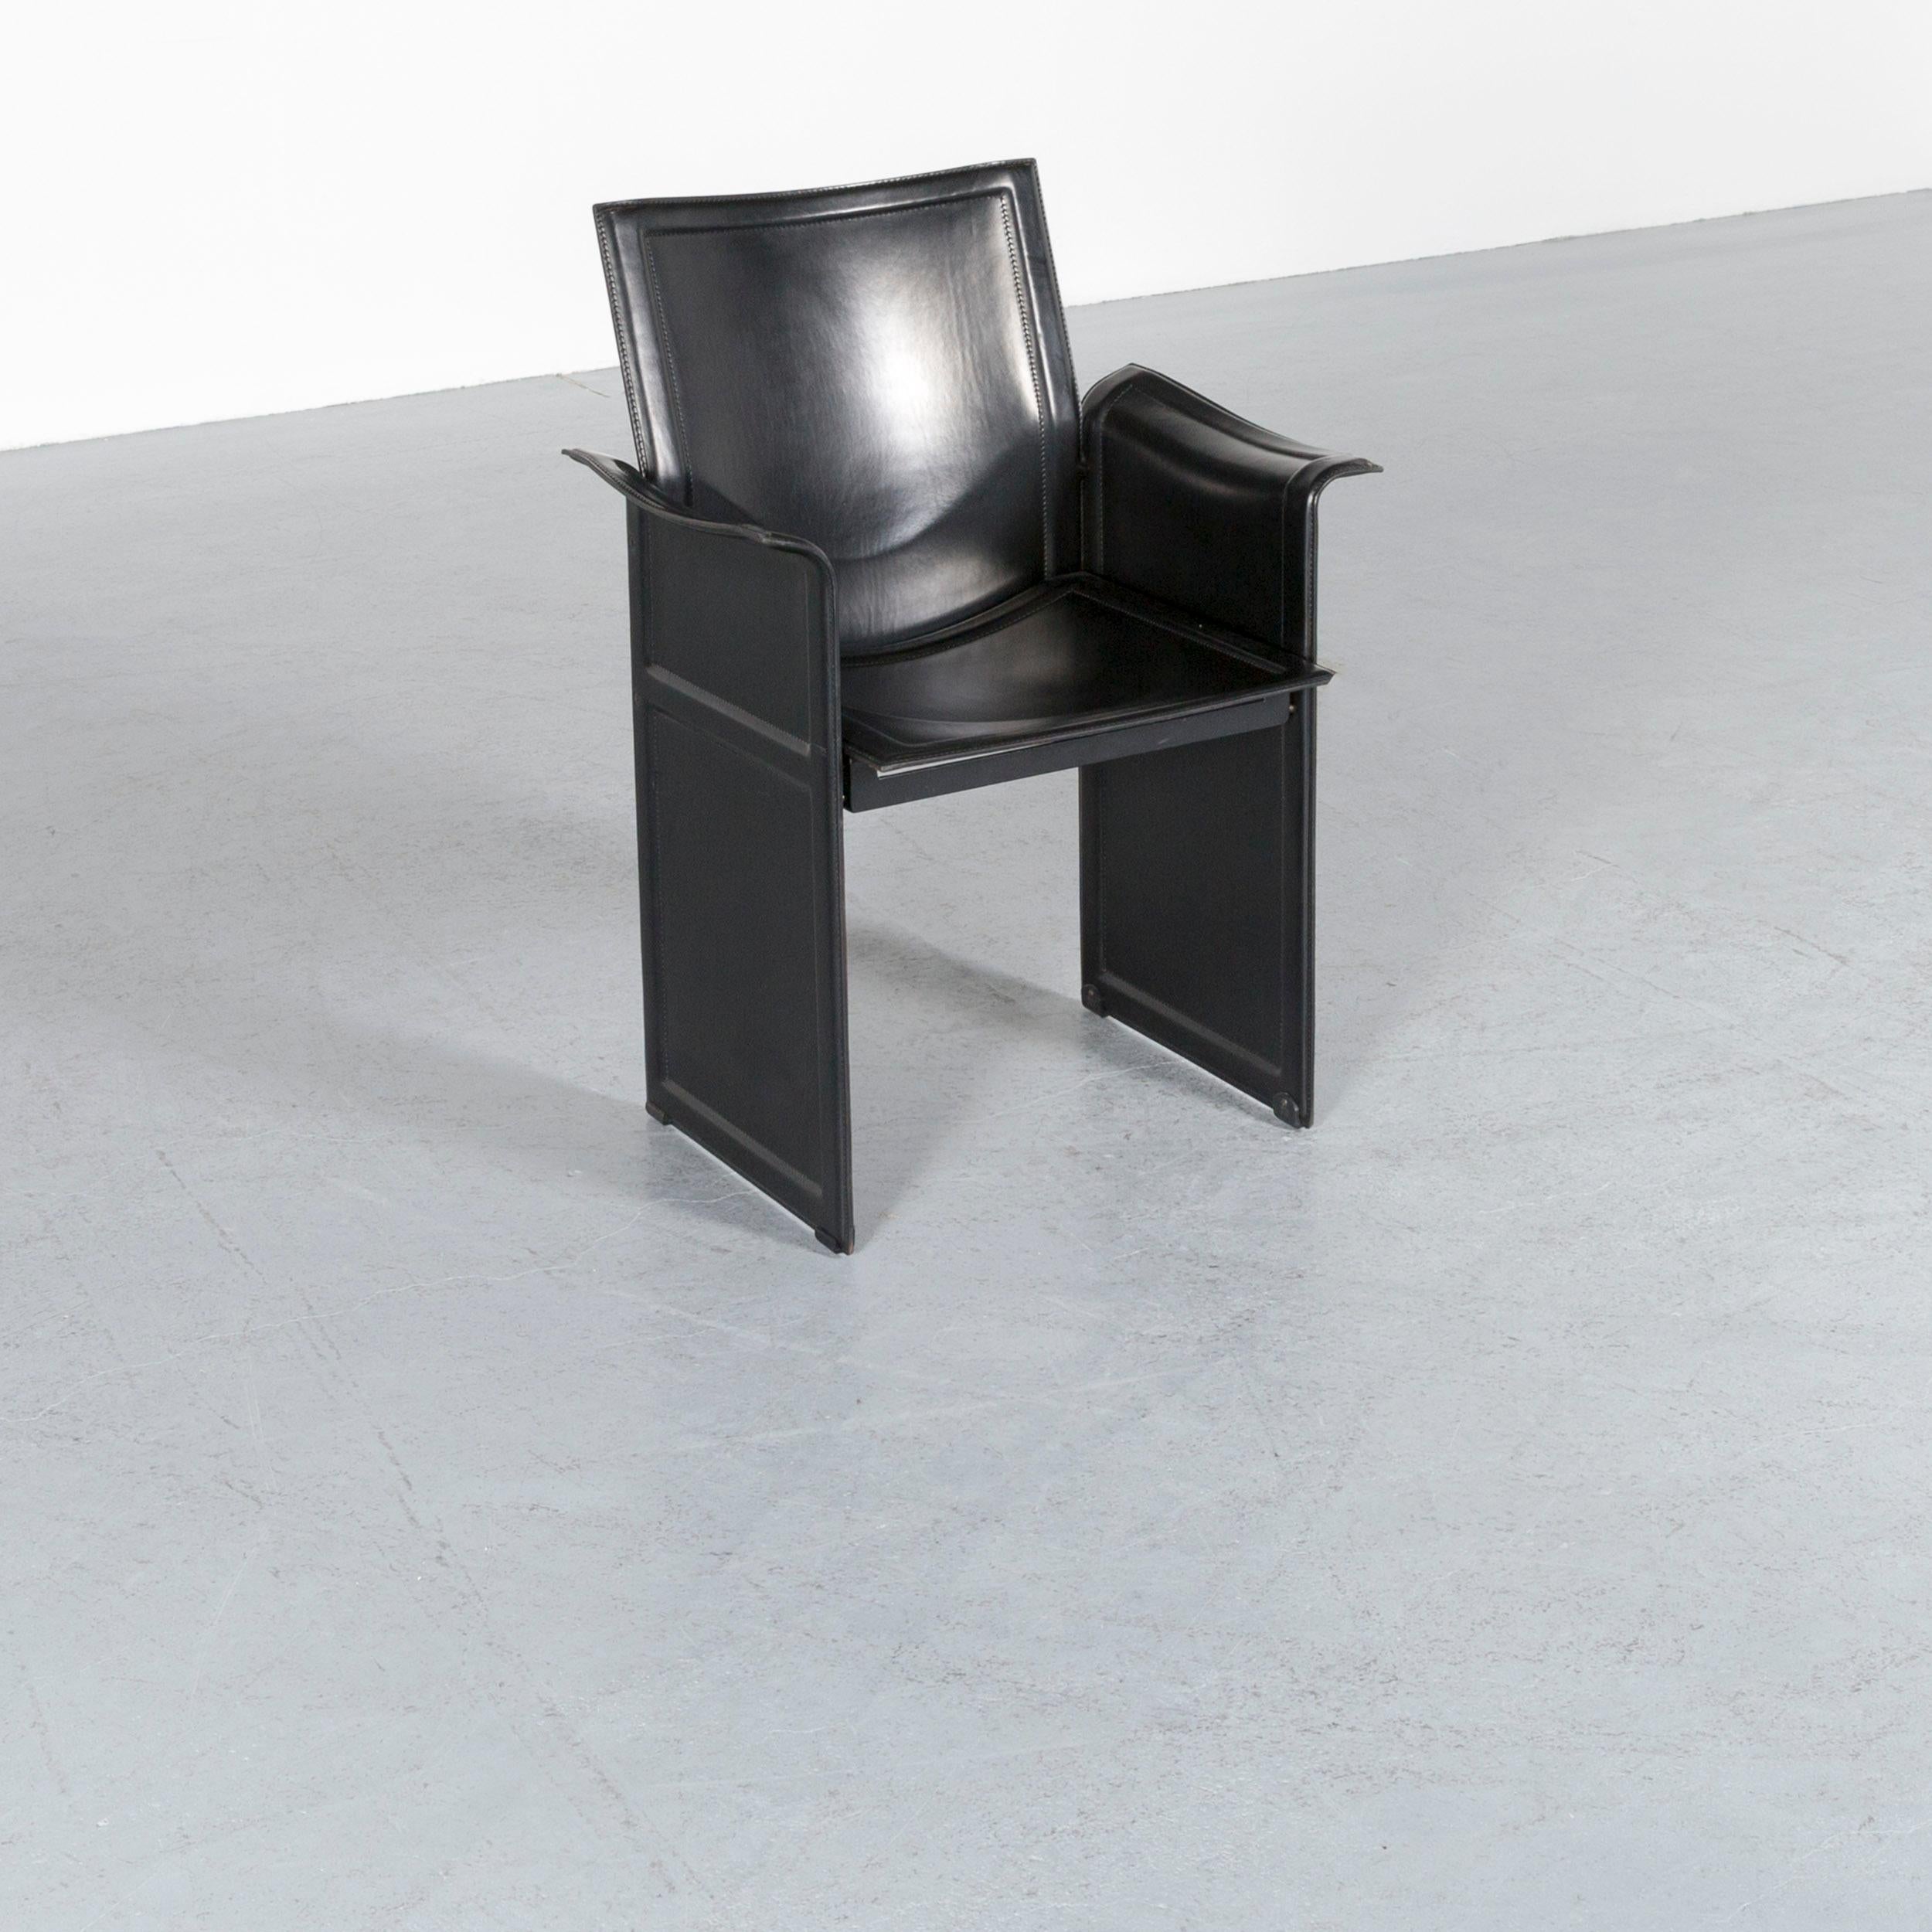 Maetteo Grassi Korium KM1 leather chair with black leather chair in a modern design made for pure comfort.
 